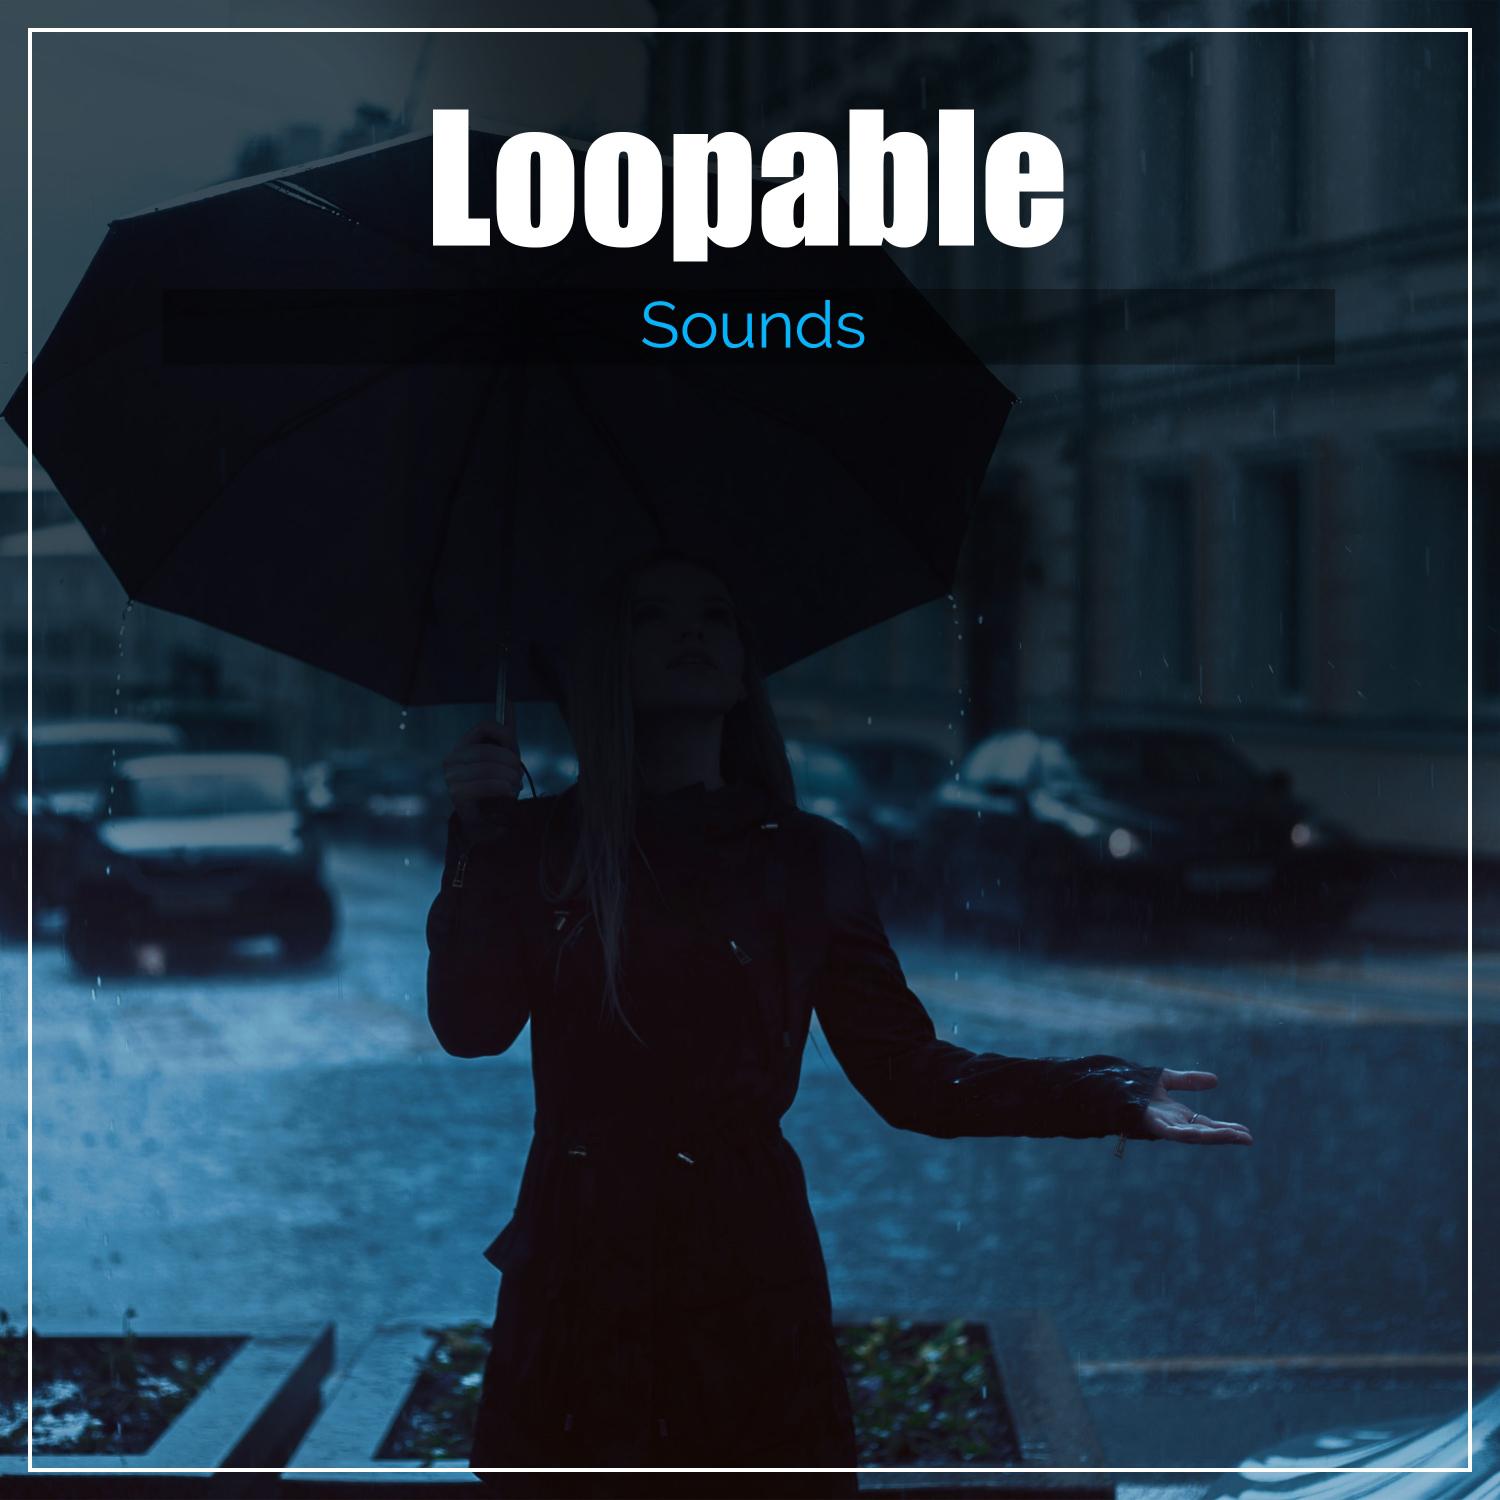 Rain Sounds: Loopable Rain Sound Meditation, Relaxing Sound of Rain, Soothing Ambient Sounds, Massage Yoga Music